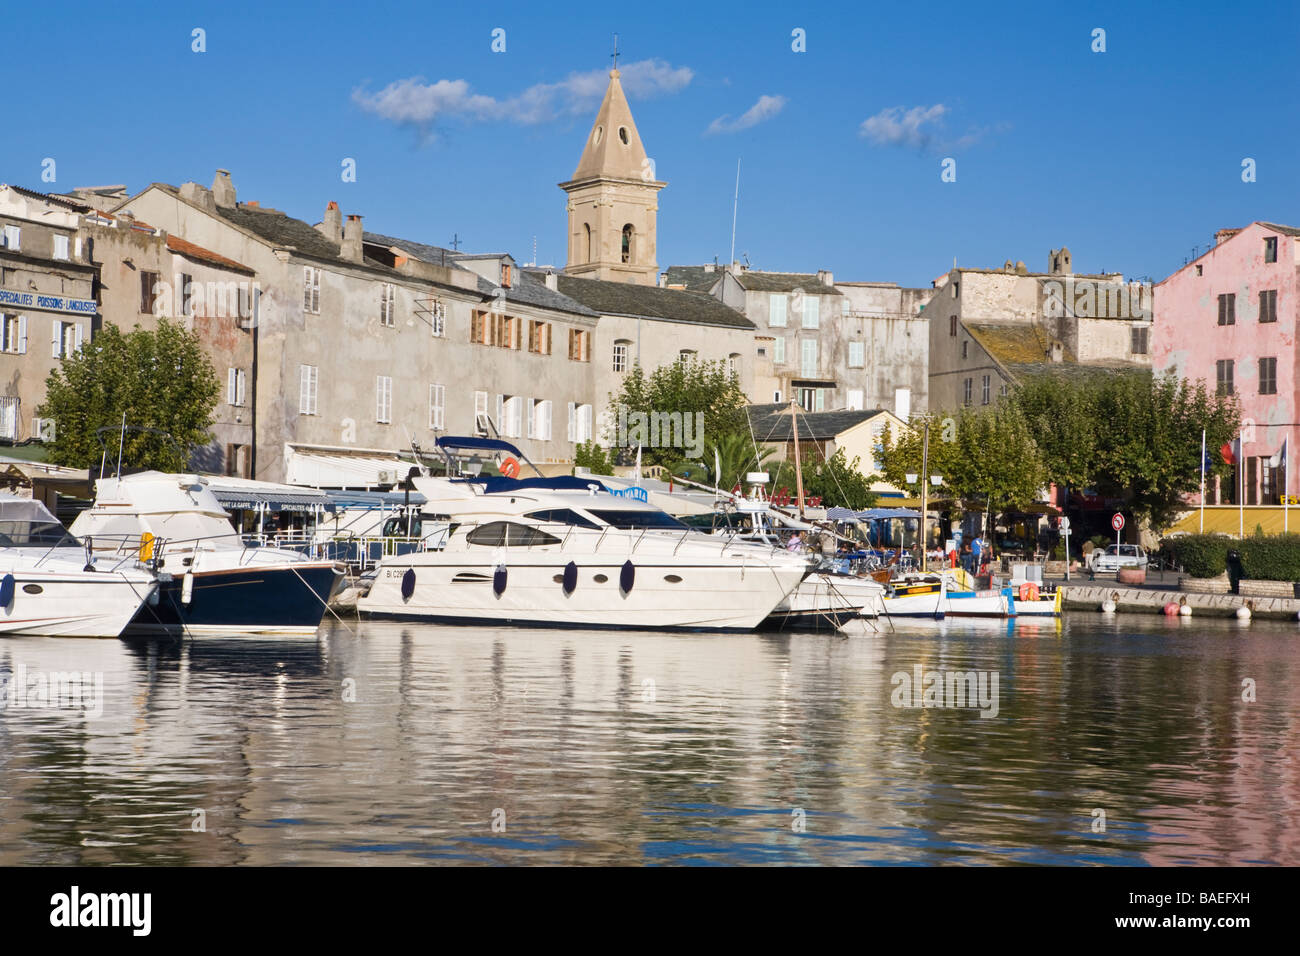 The waterfront at St Florent Corsica France Stock Photo